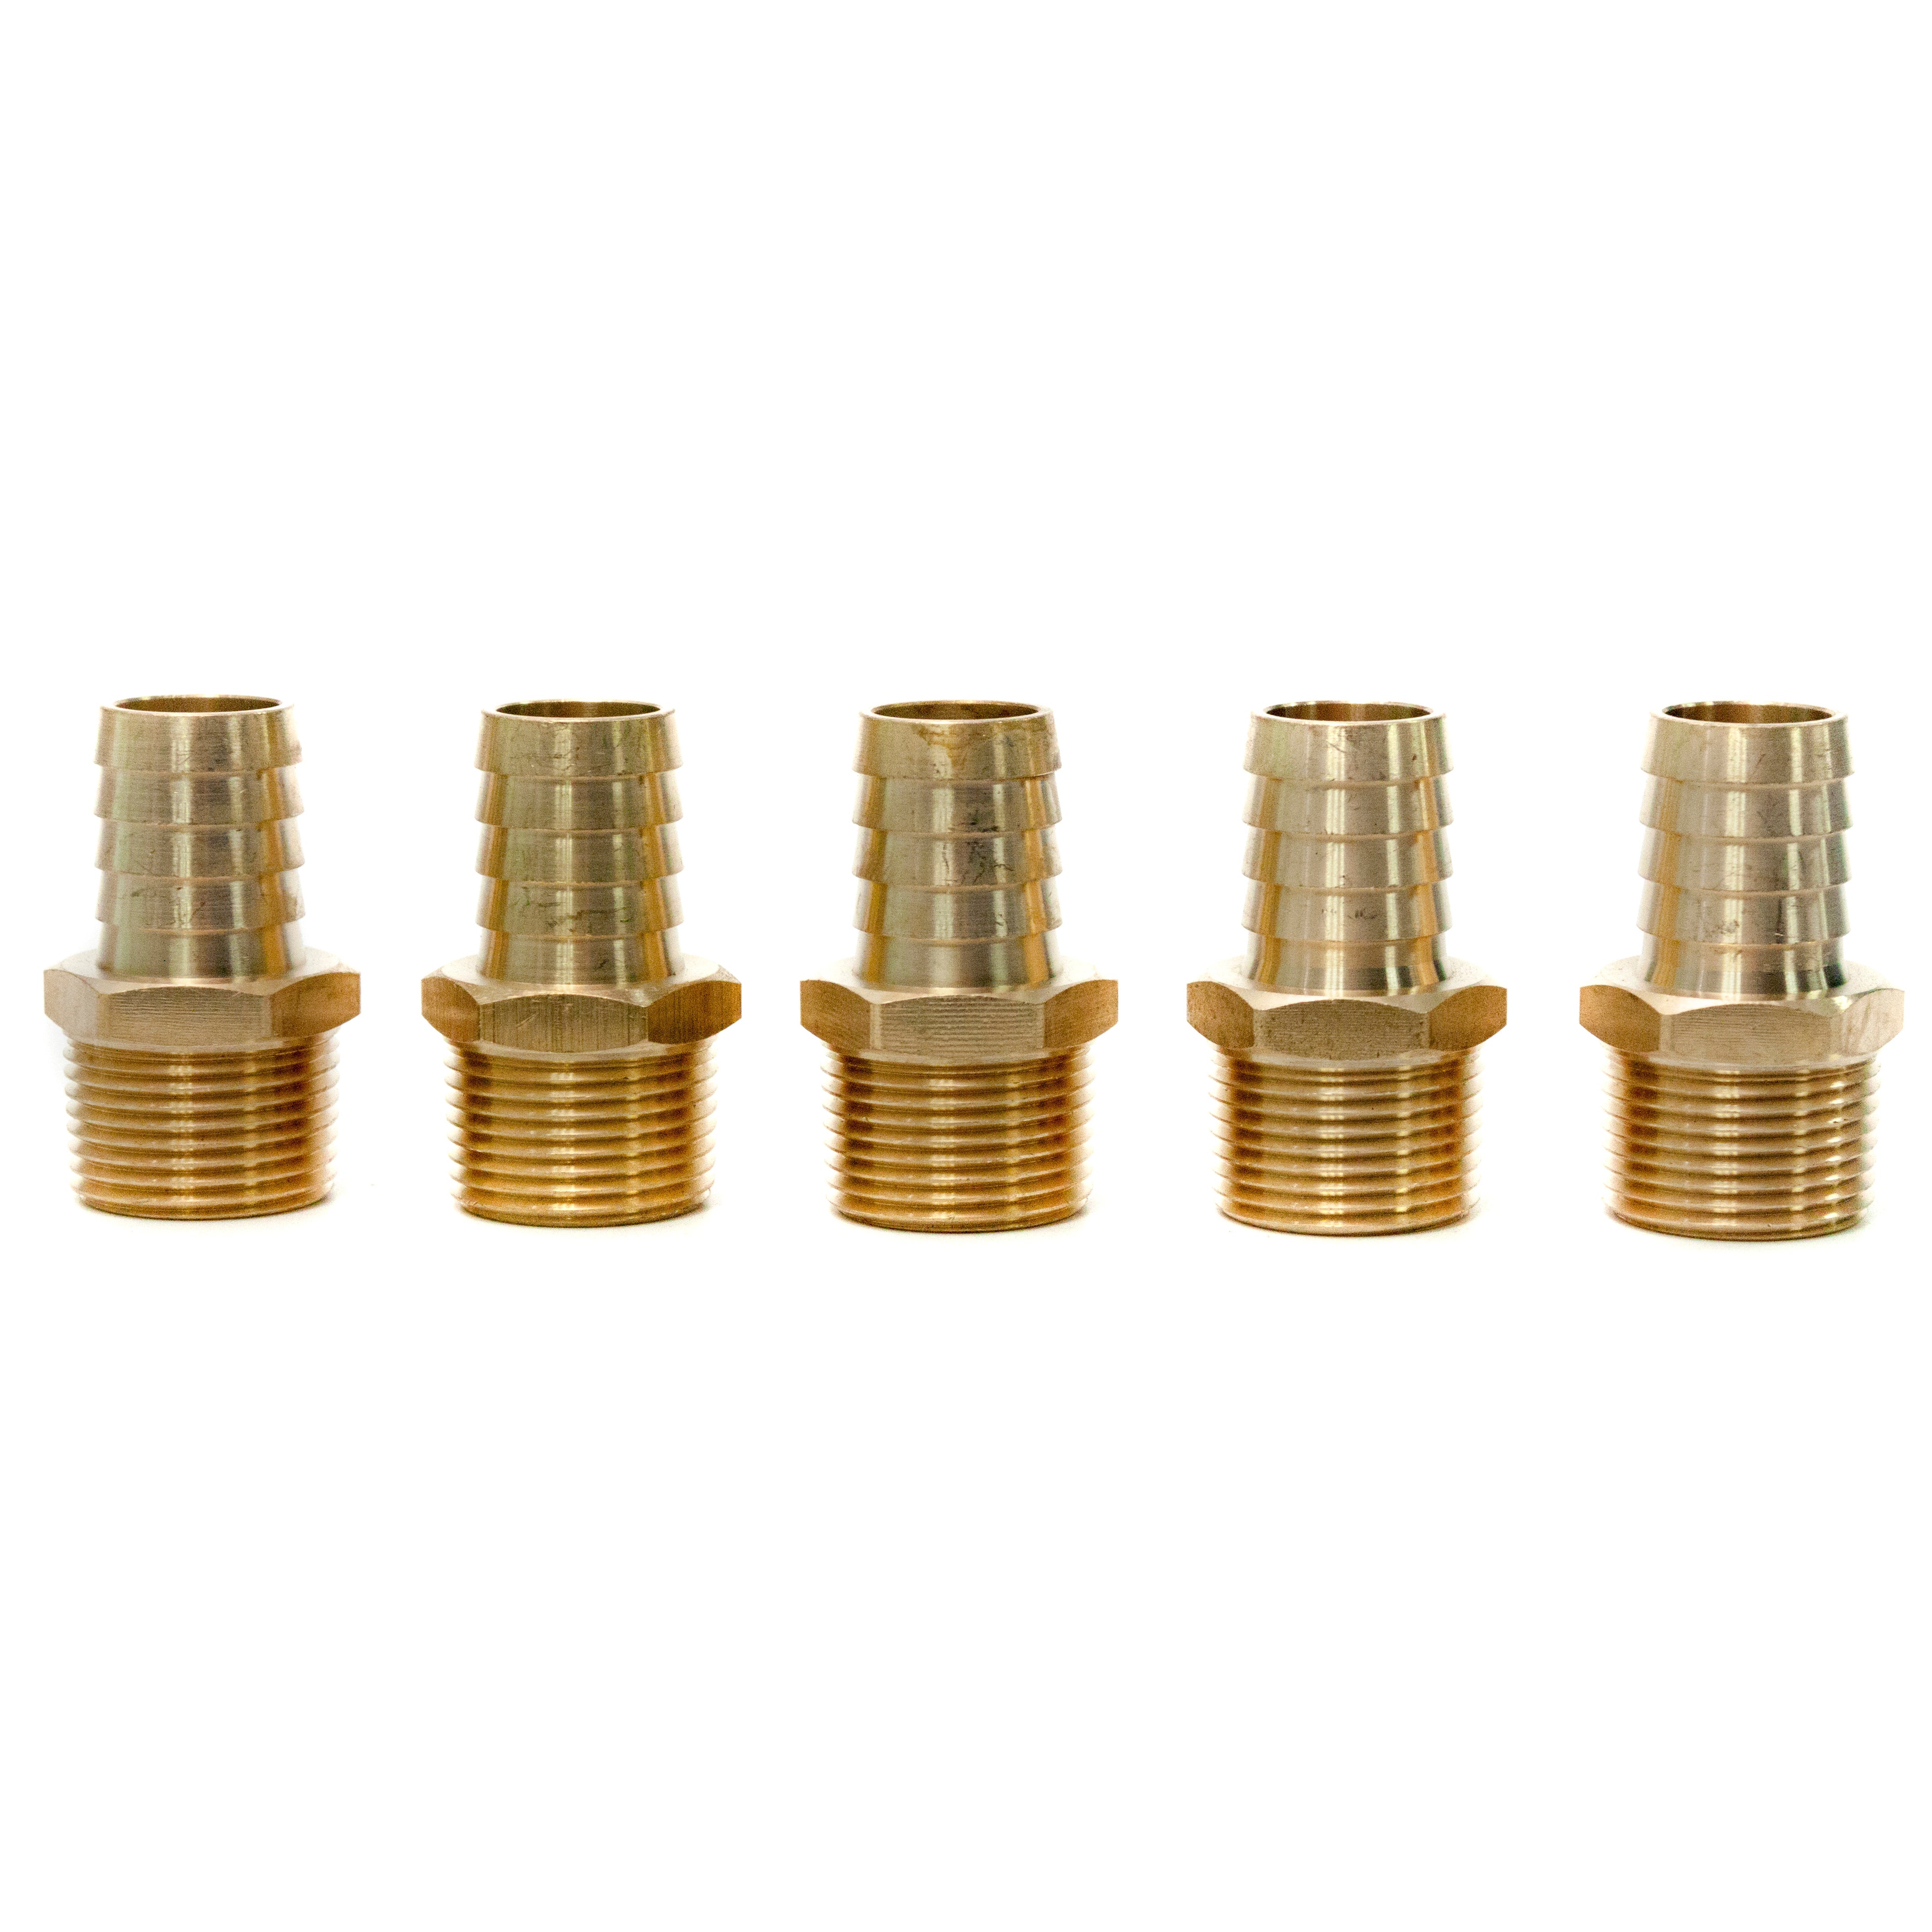 LTWFITTING Brass Barb Fitting Coupler/Connector 3/4-Inch Hose ID x 3/4-Inch Male NPT Gas(Pack of 5)